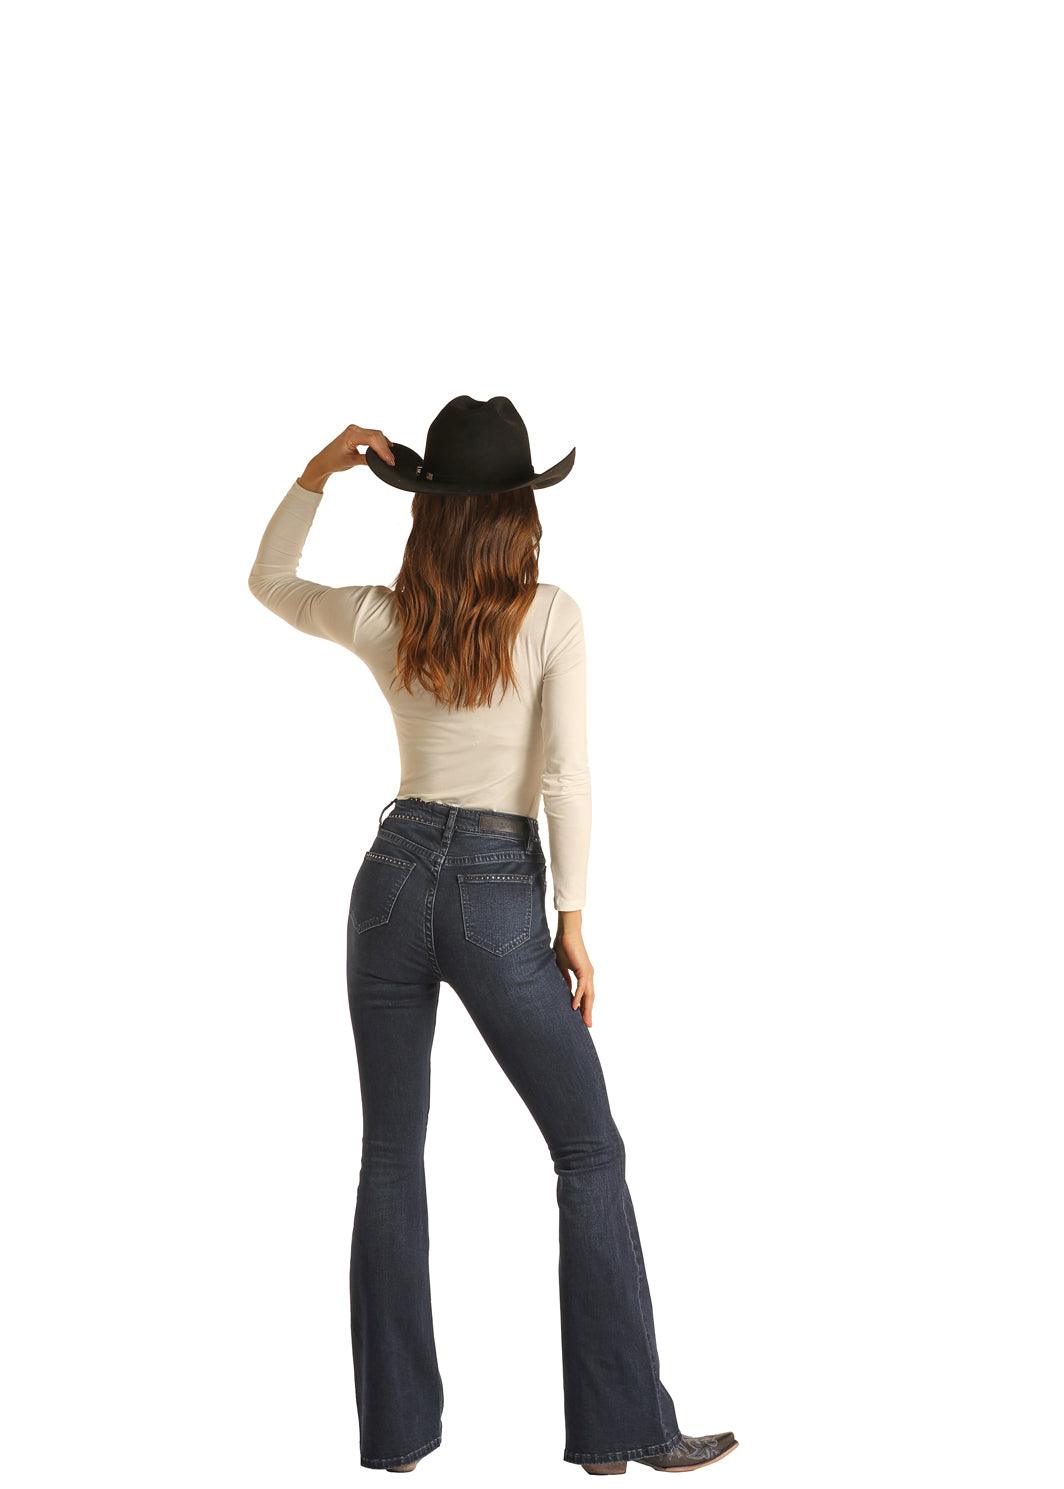 Rock & Roll Cowgirl Dark Wash Extra Stretch High Rise Bell Bottom Jeans